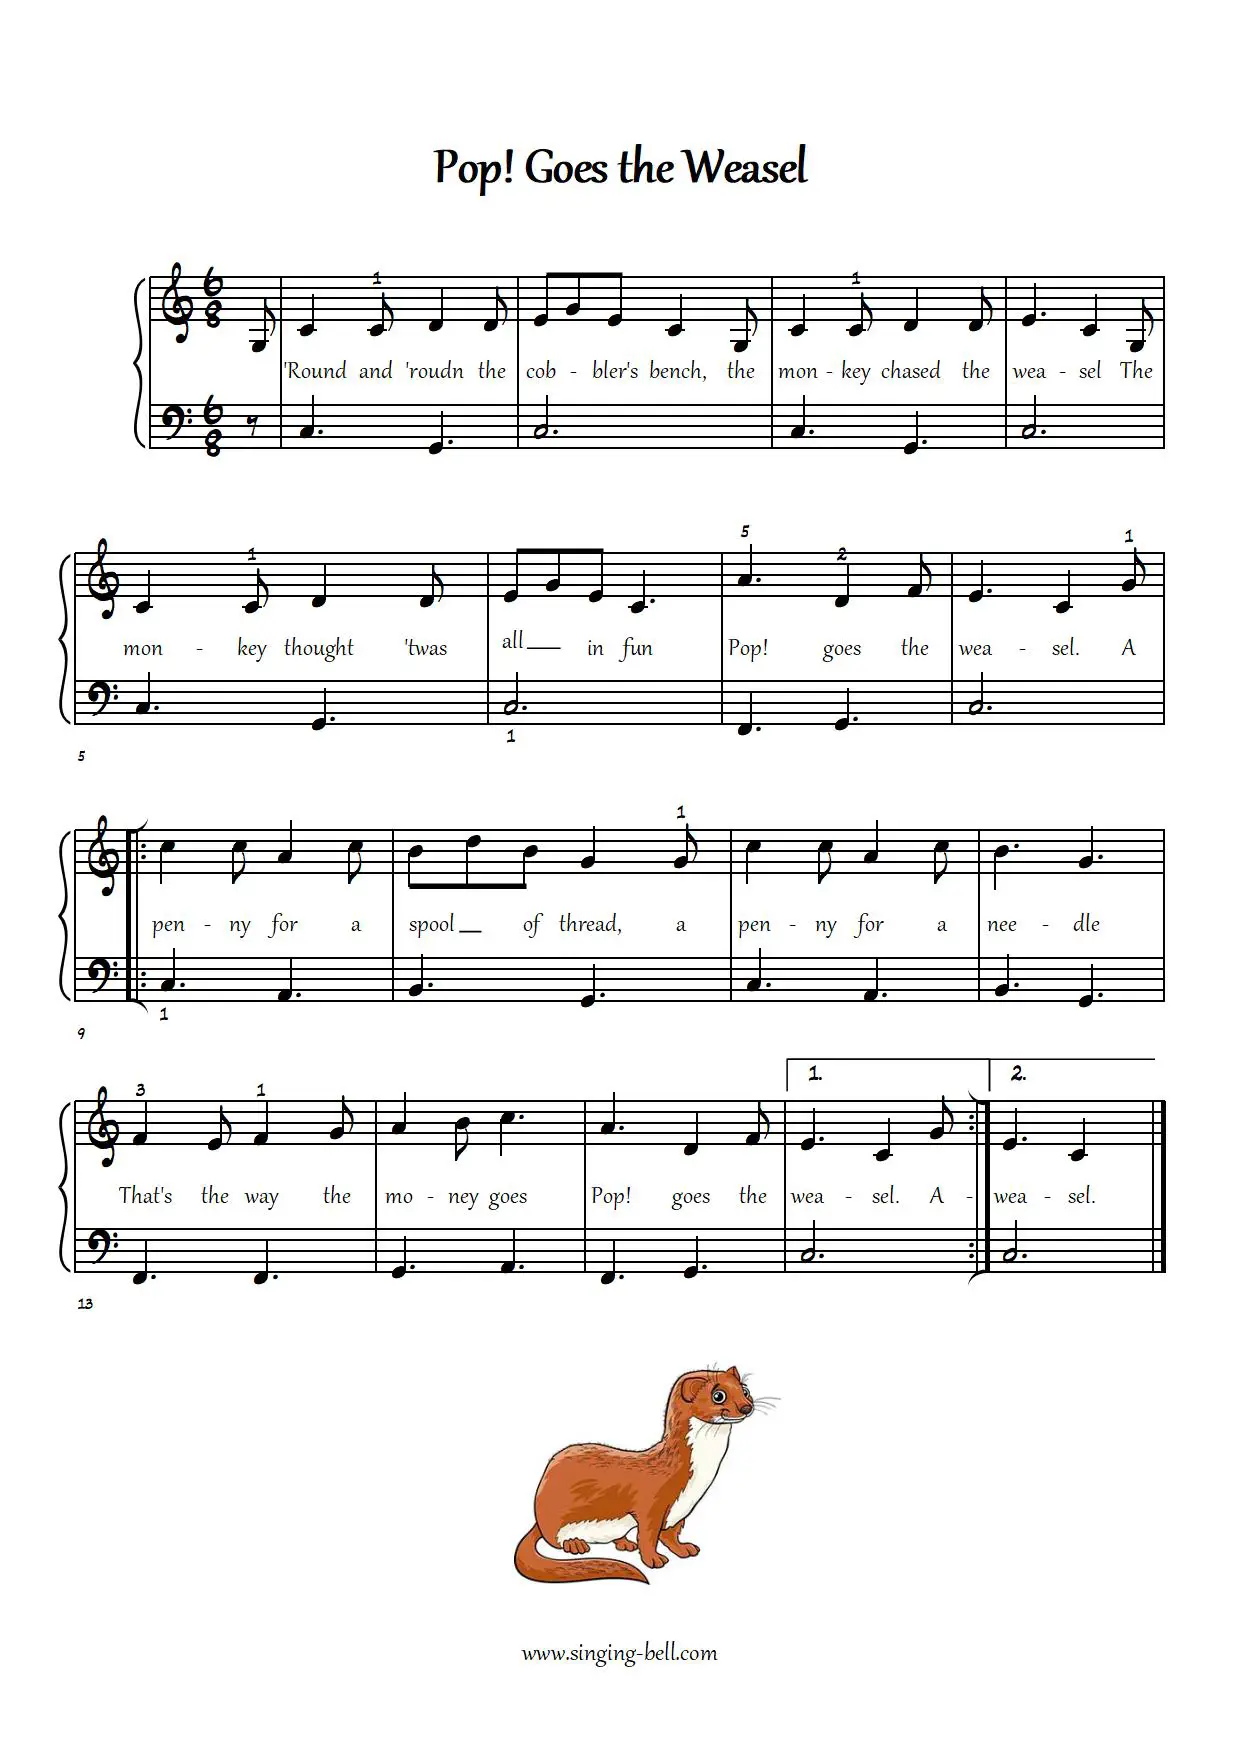 Pop Goes the Weasel easy piano sheet music notes chords beginners pdf